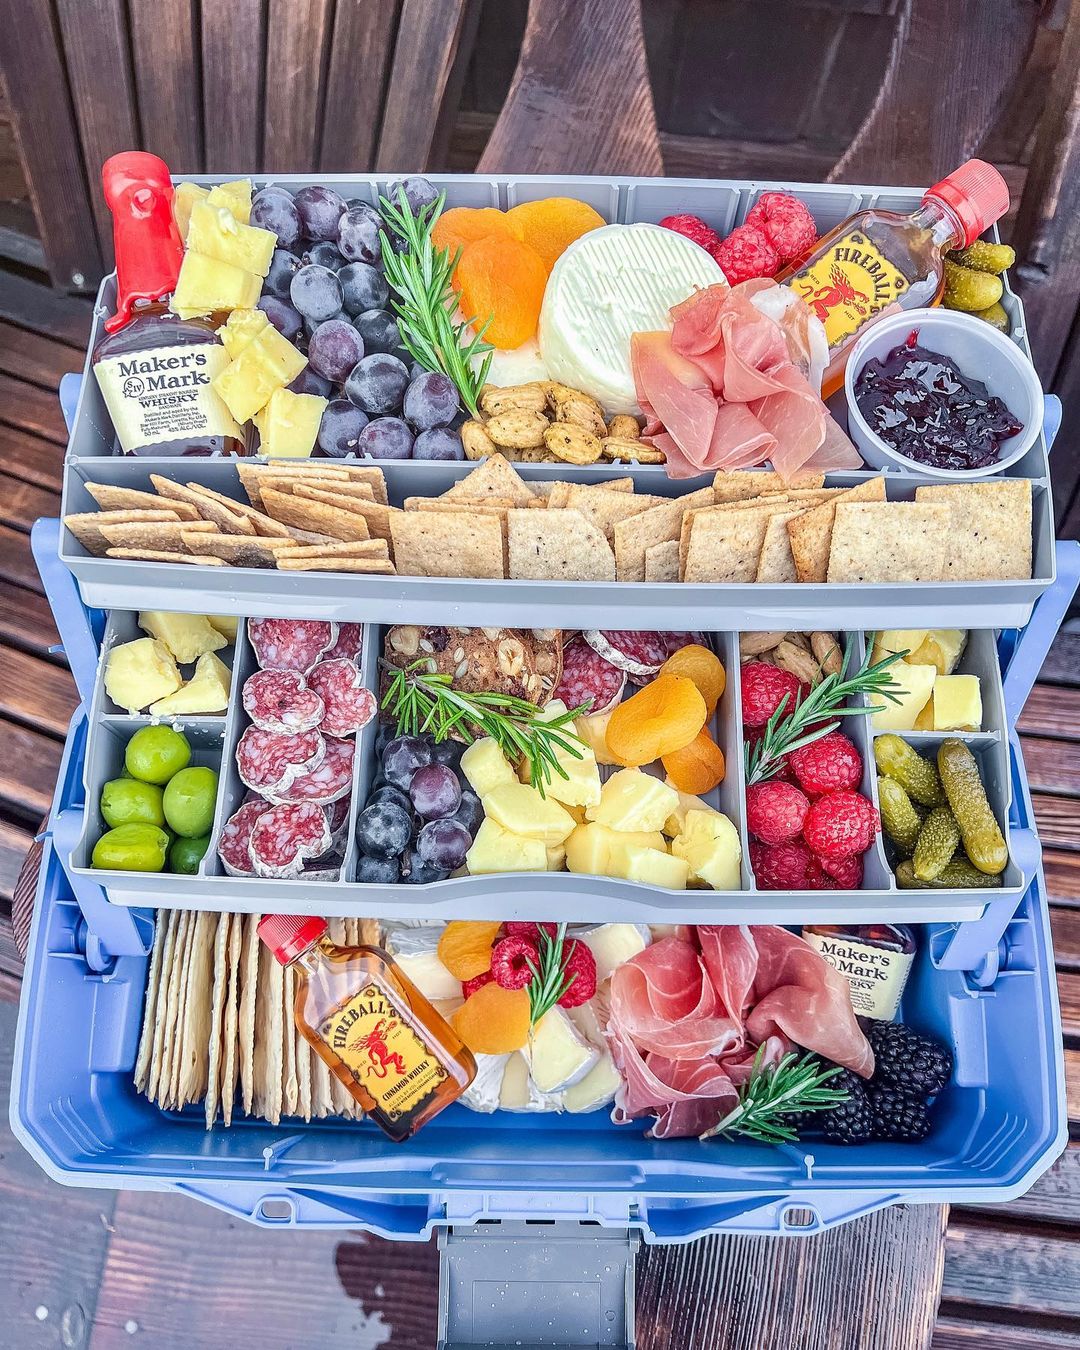 Columbus Craft Meats on Twitter: "How clever is this? Charcuterie in a tackle  box! Proof that charcuterie can go ANYWHERE. What kind of creative  containers have you used to take charcuterie on